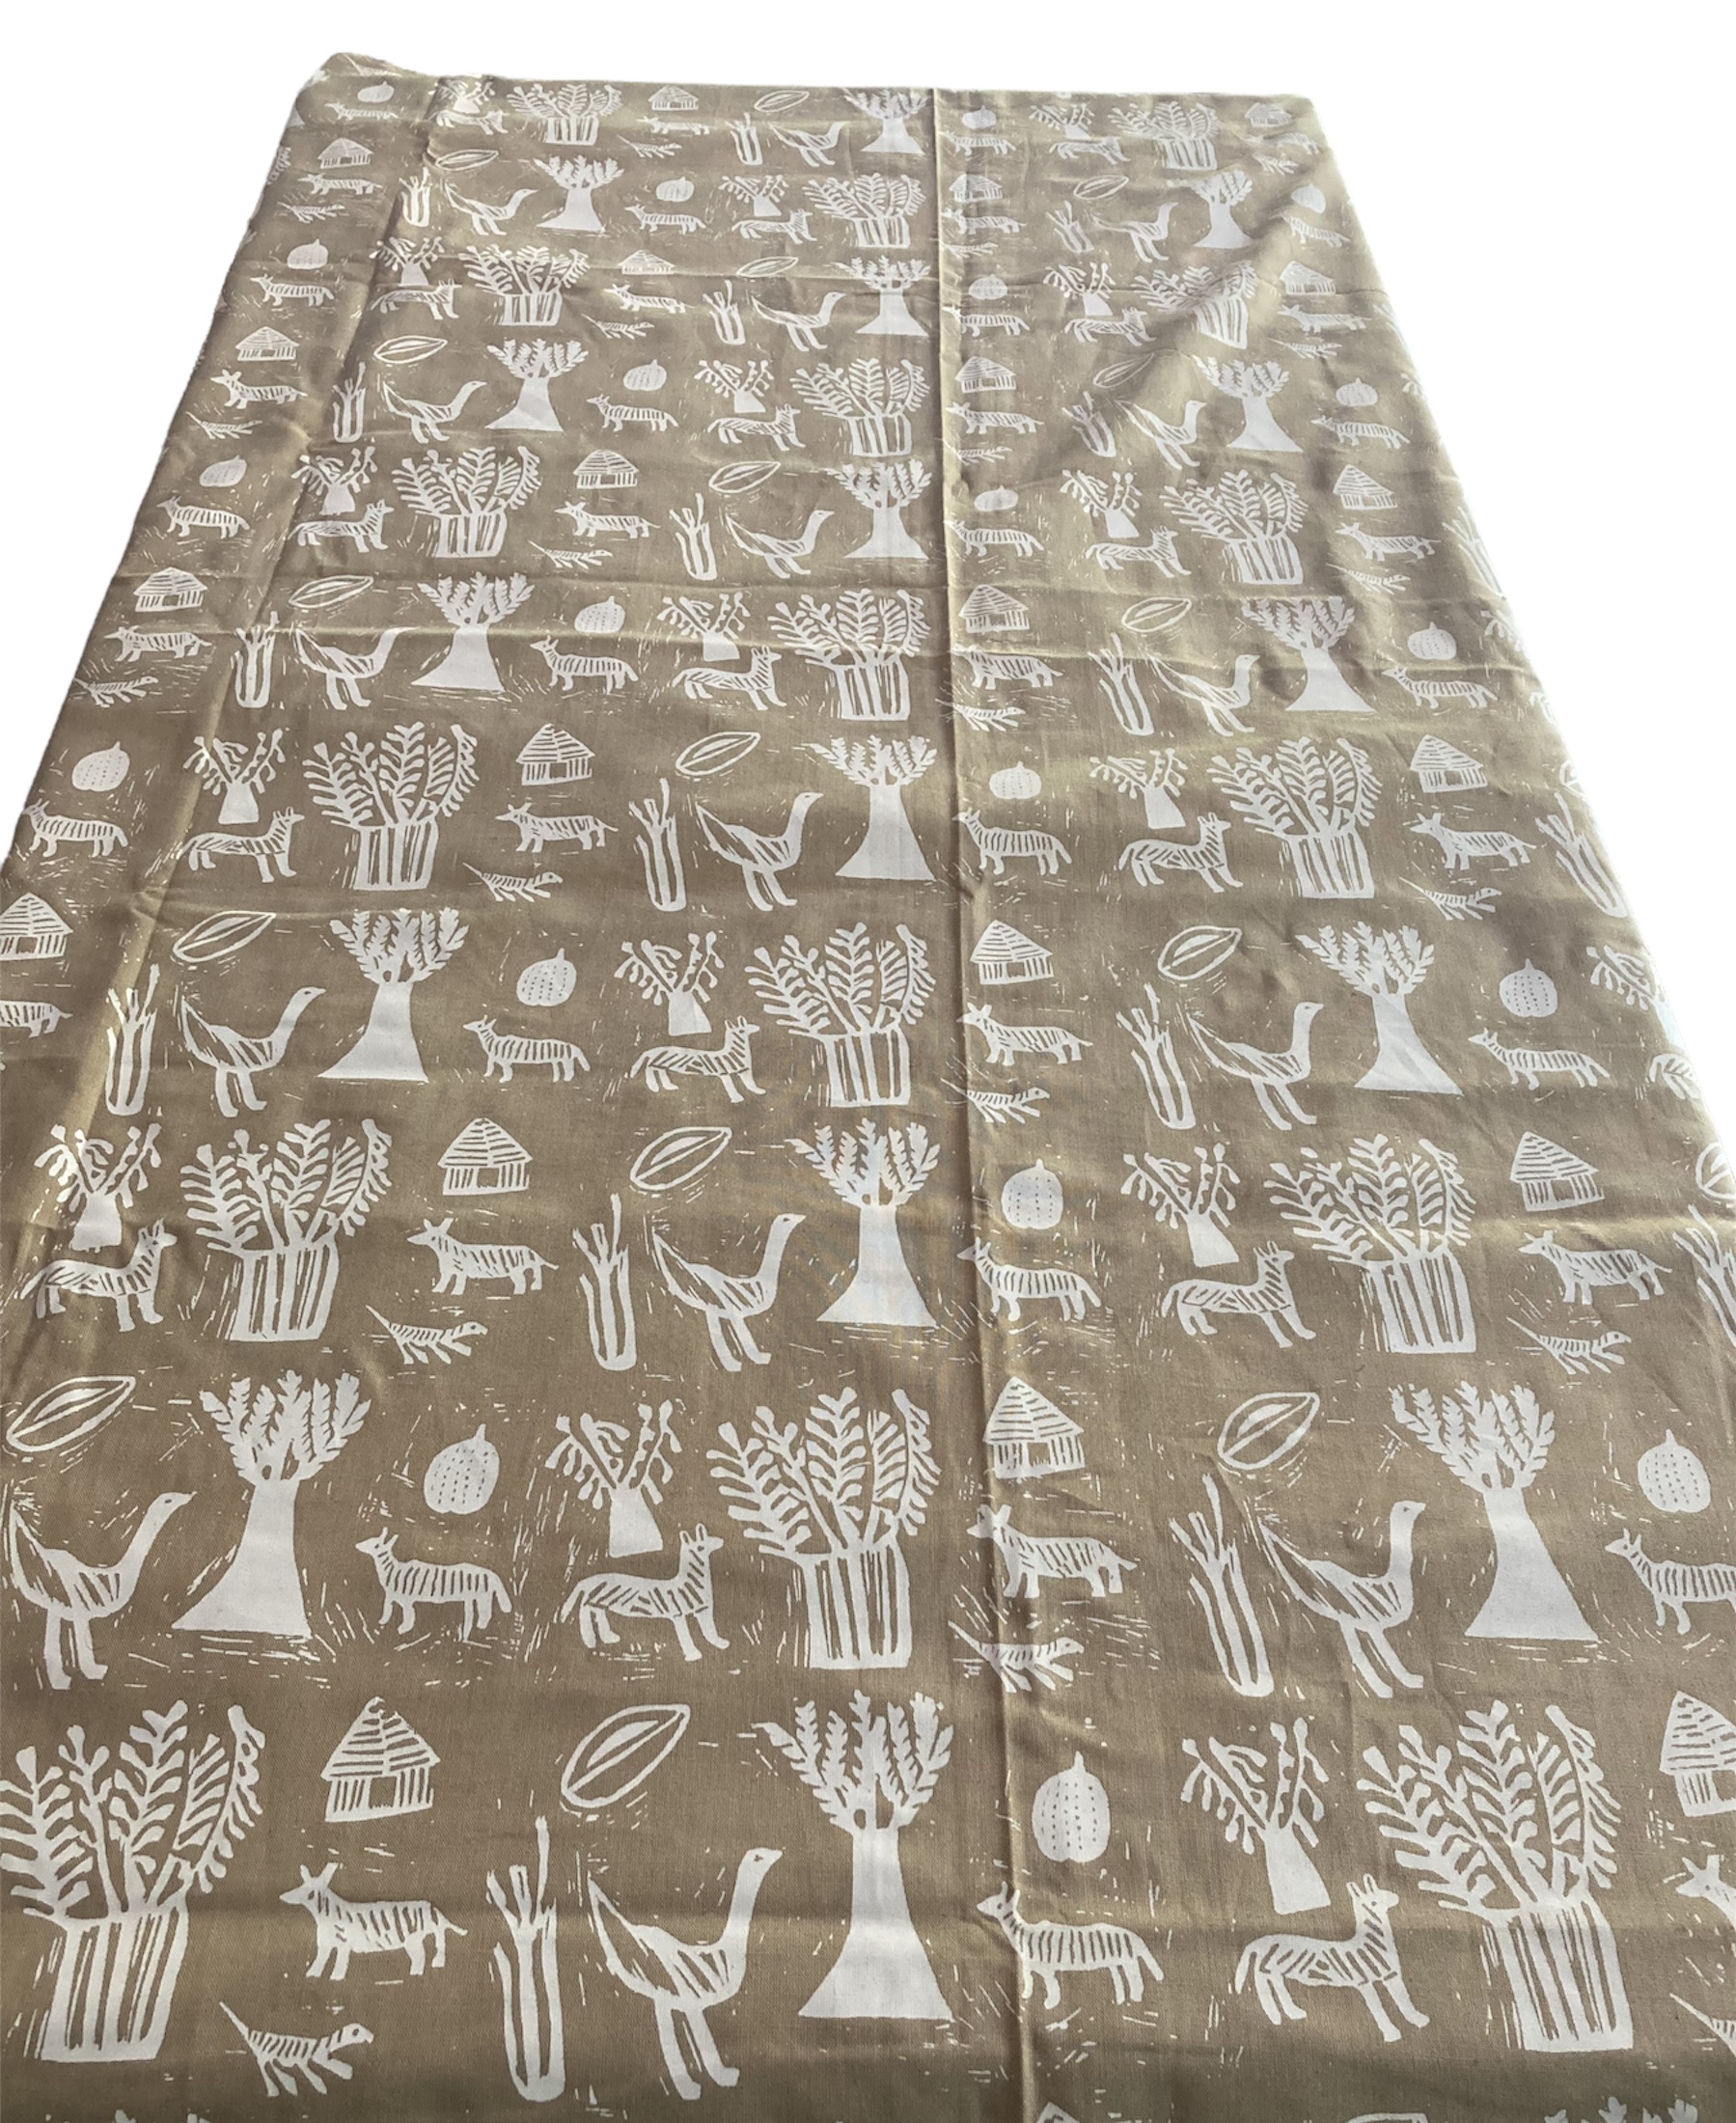 100% cotton Tablecloth approx. 59" x 57" from Namibia - # b16t